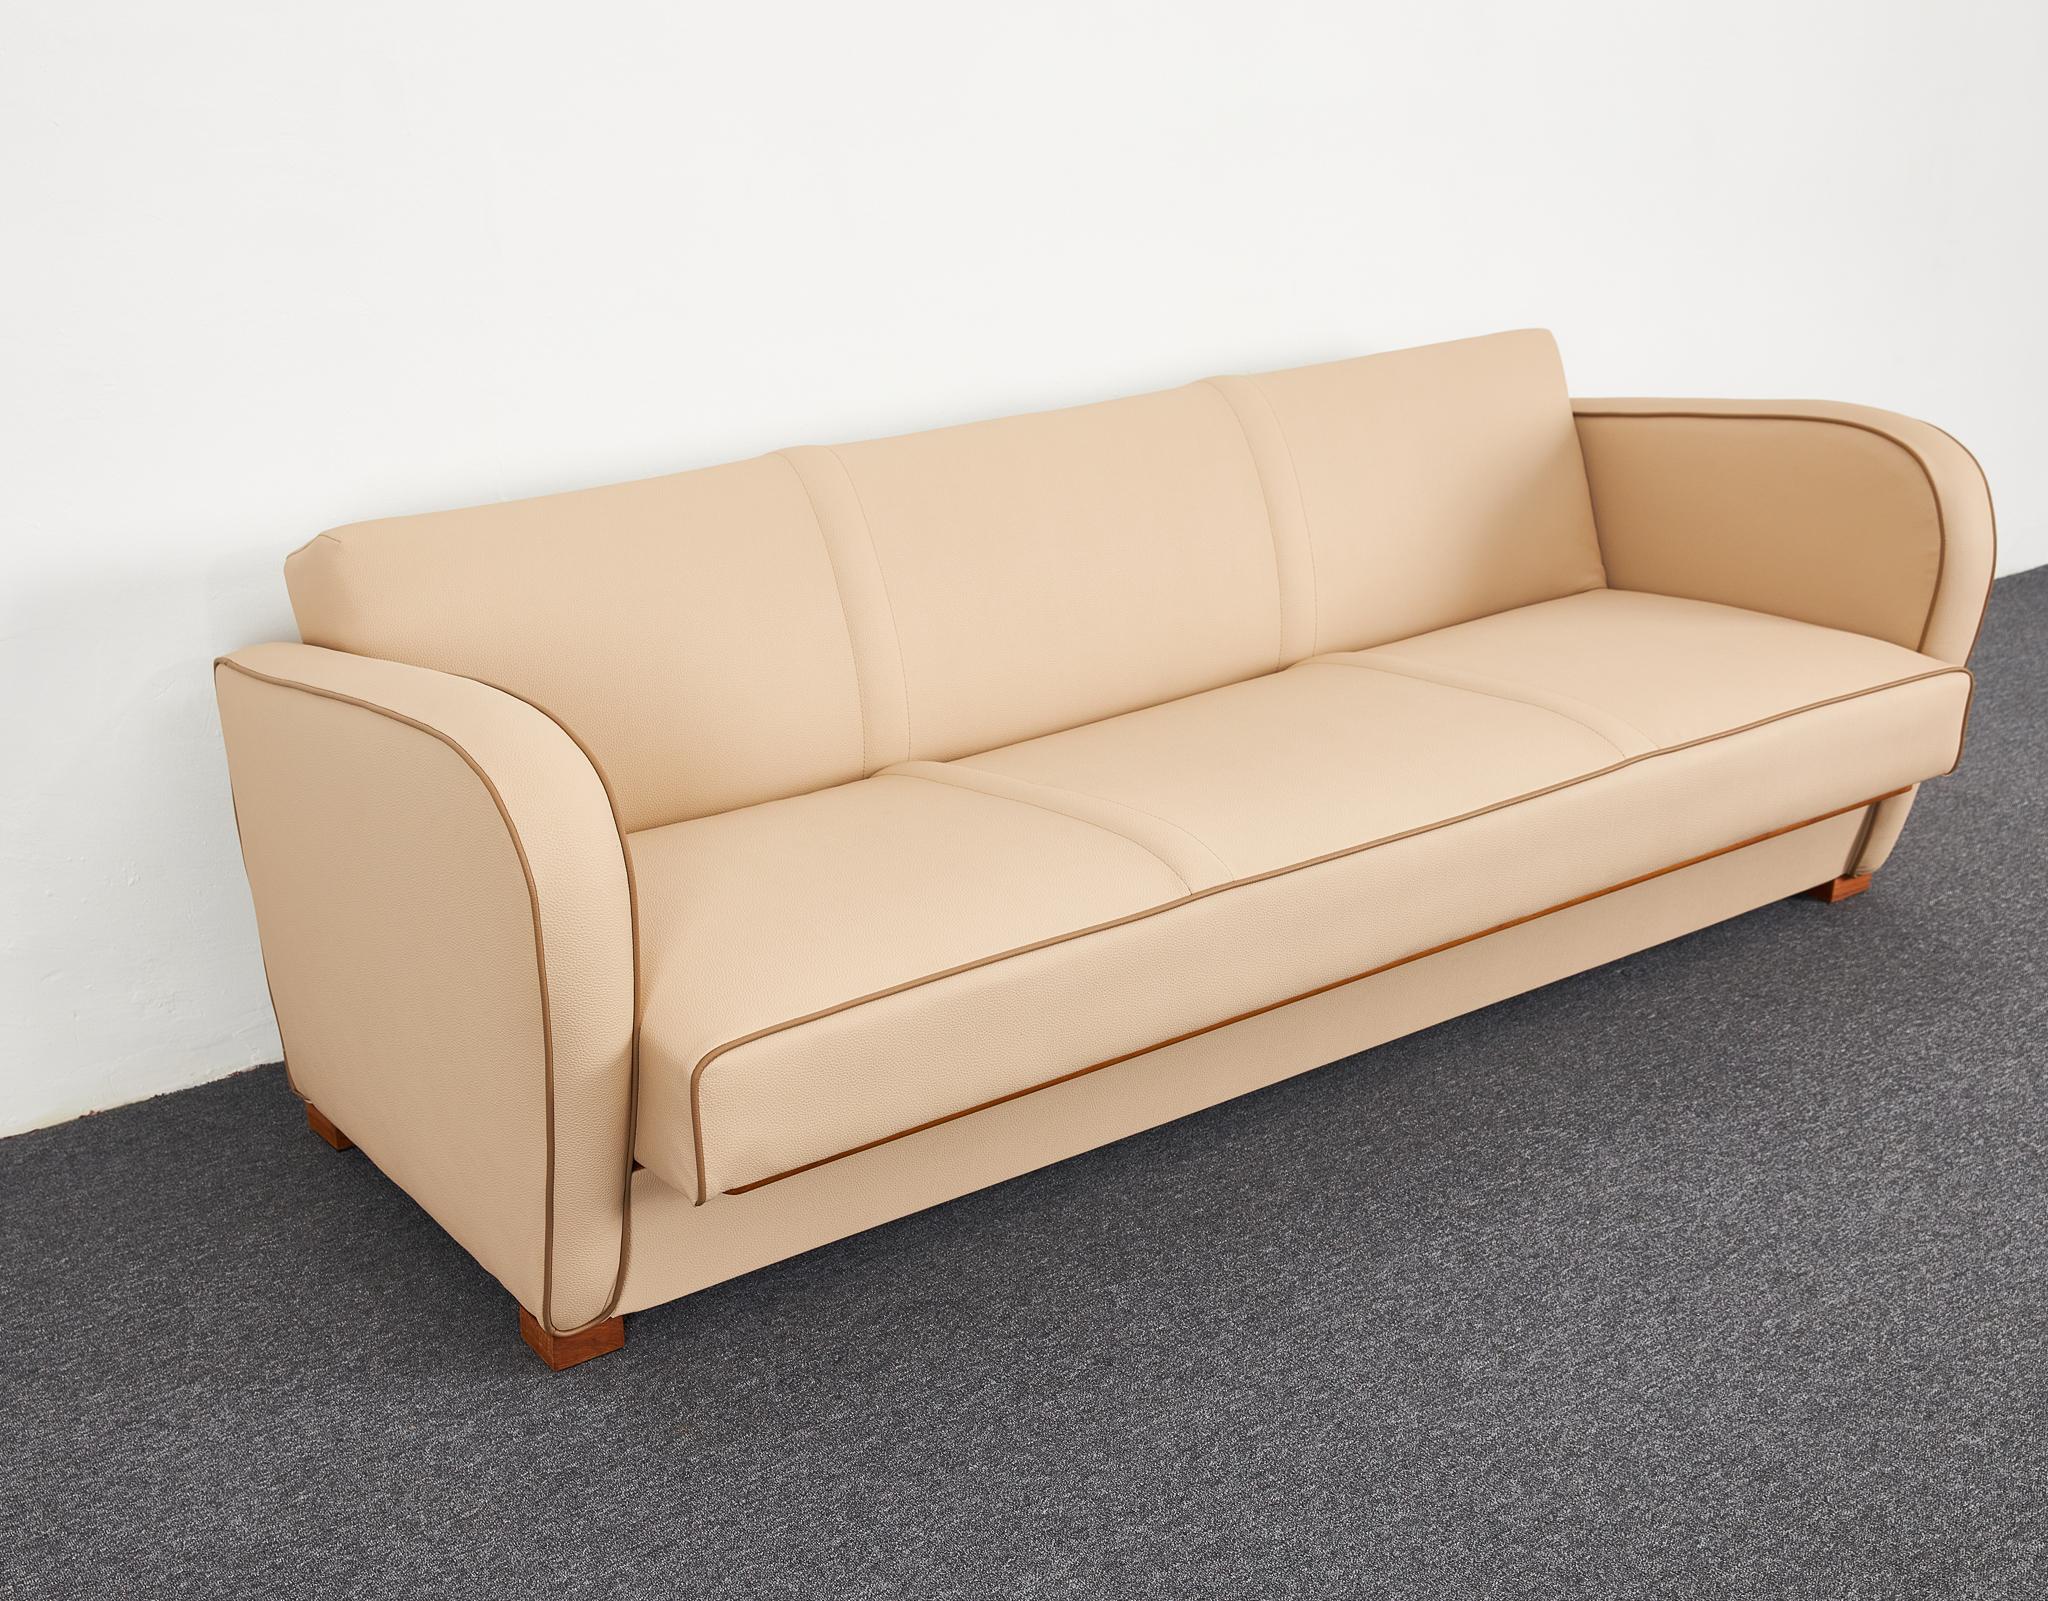 A true classic Art Deco Halabala sofa from the 1930's. Eternal design is this world of form. Its classic yet modern lines stand out in the 21st century. Completely refurbished structurally, reinforced and re-tied with original copper epeda springs,